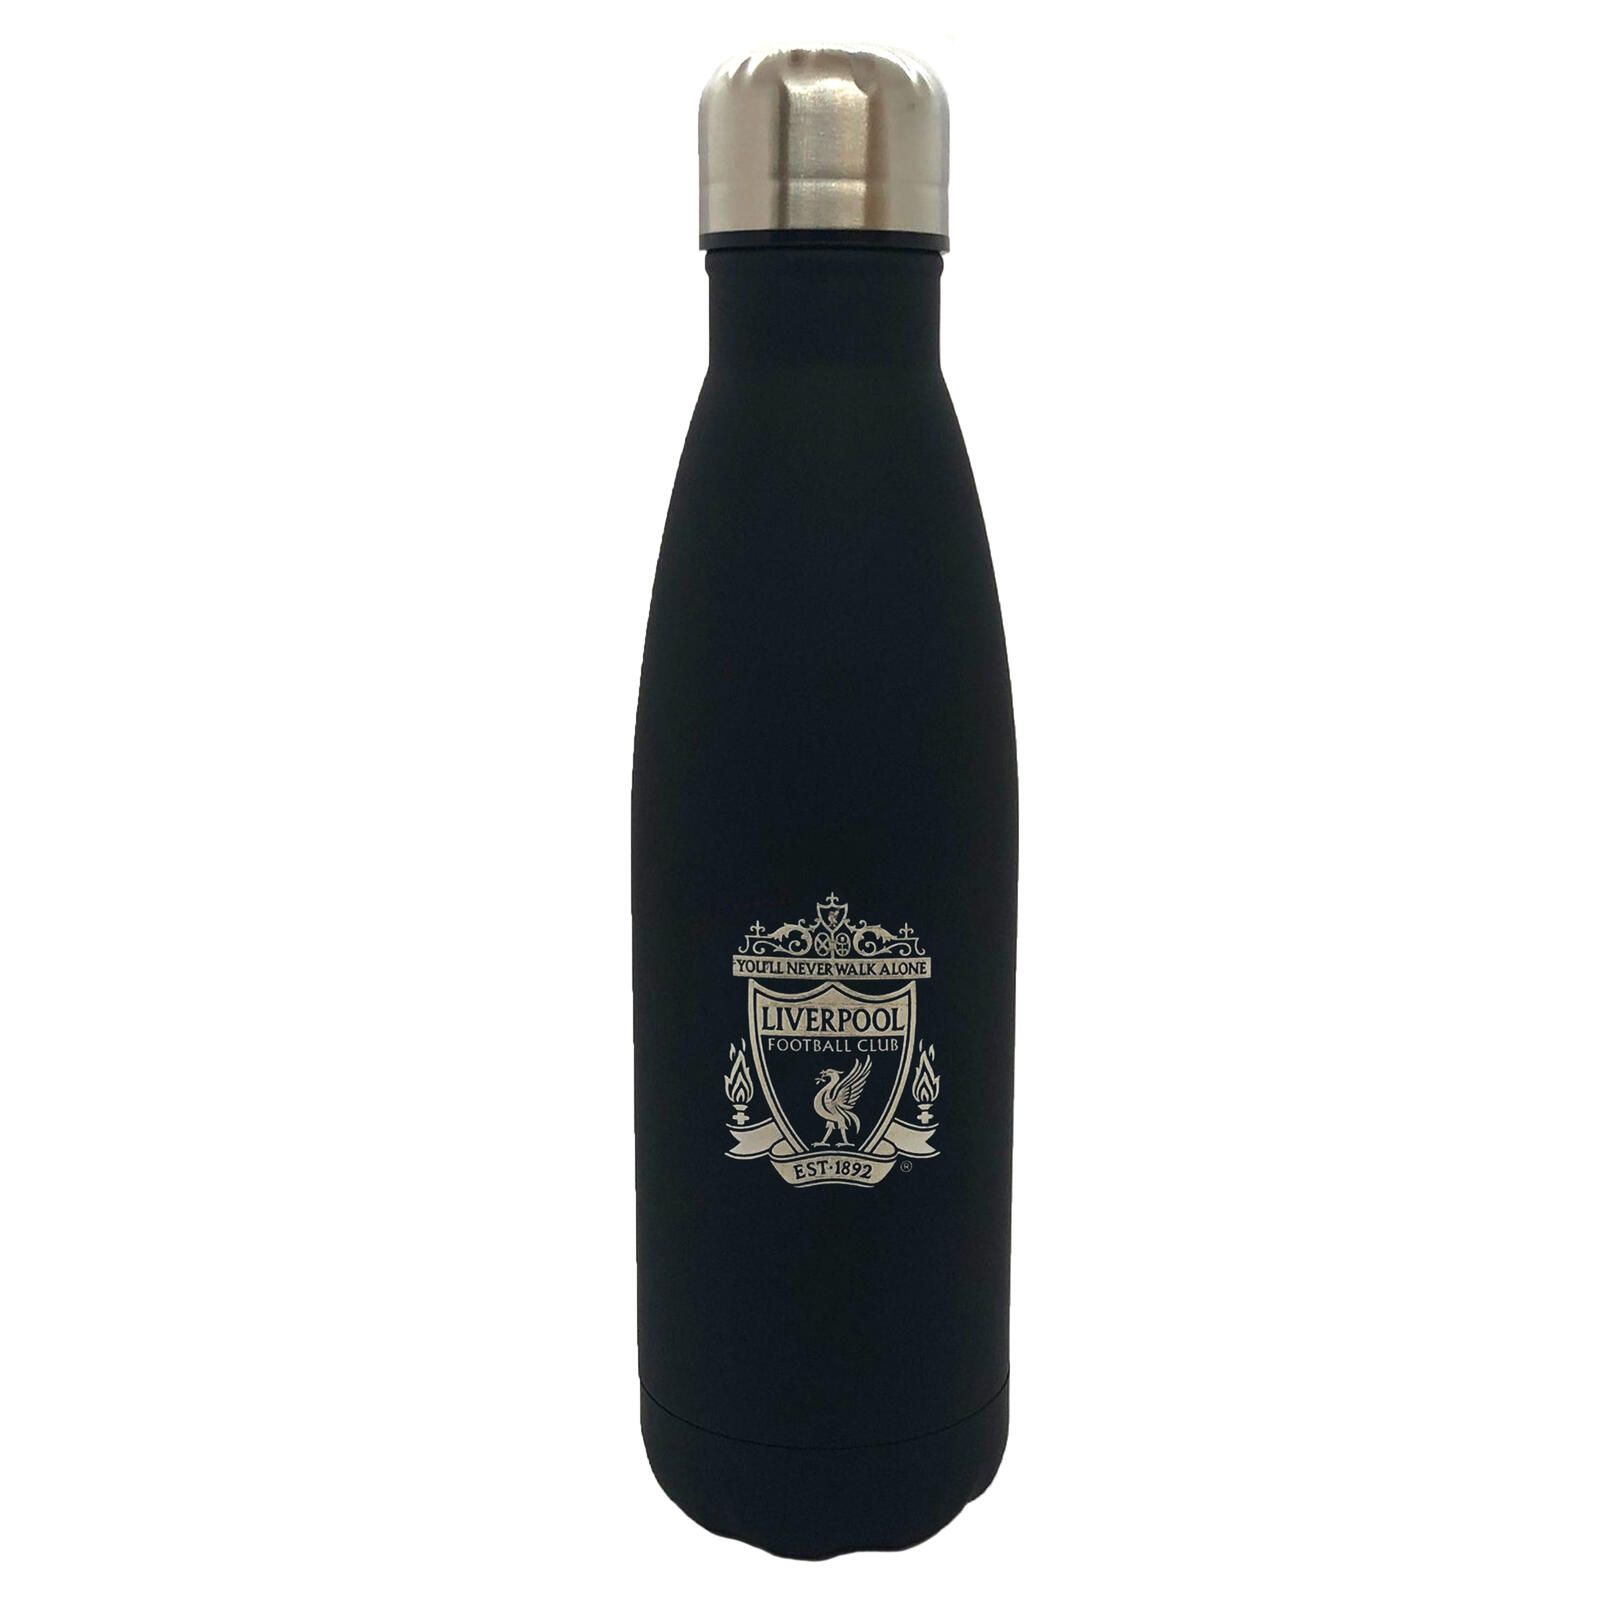 LIVERPOOL FC Liverpool FC Flask Water Bottle Thermal Hot Cold Drinks 500ml OFFICIAL Football